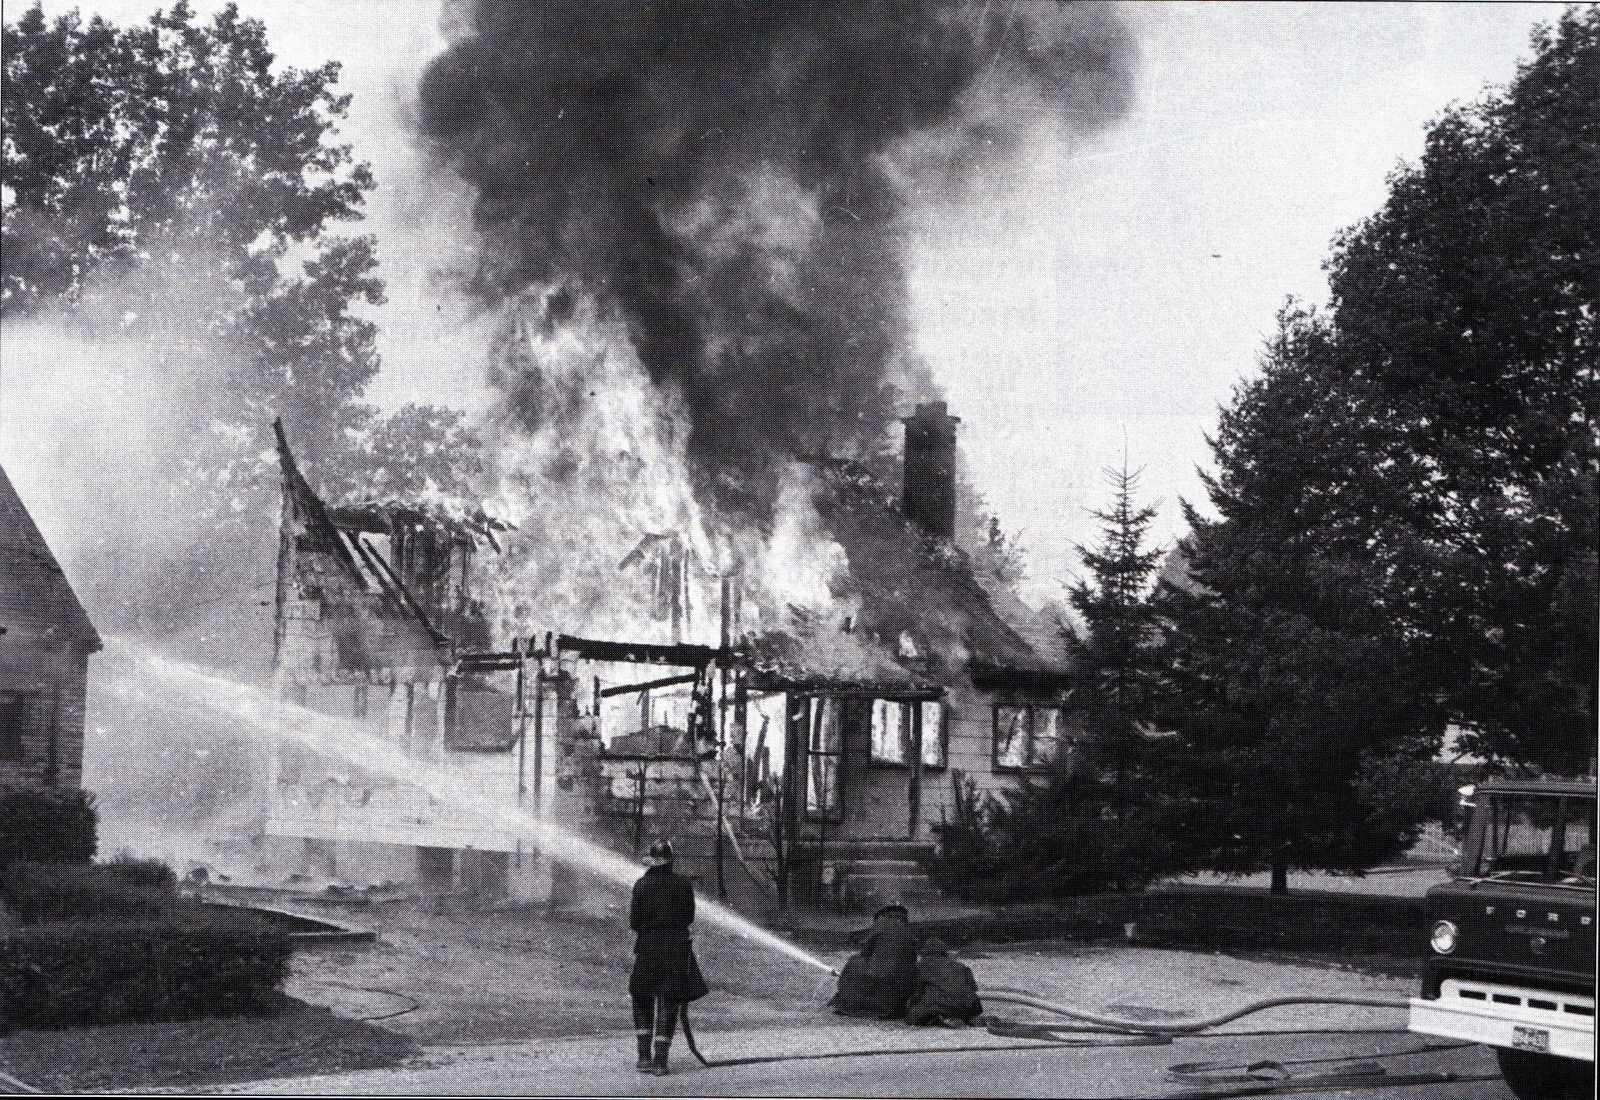 A black and white photo shows a house full engulfed in flames with a fire fighter holding a hose spraying water.